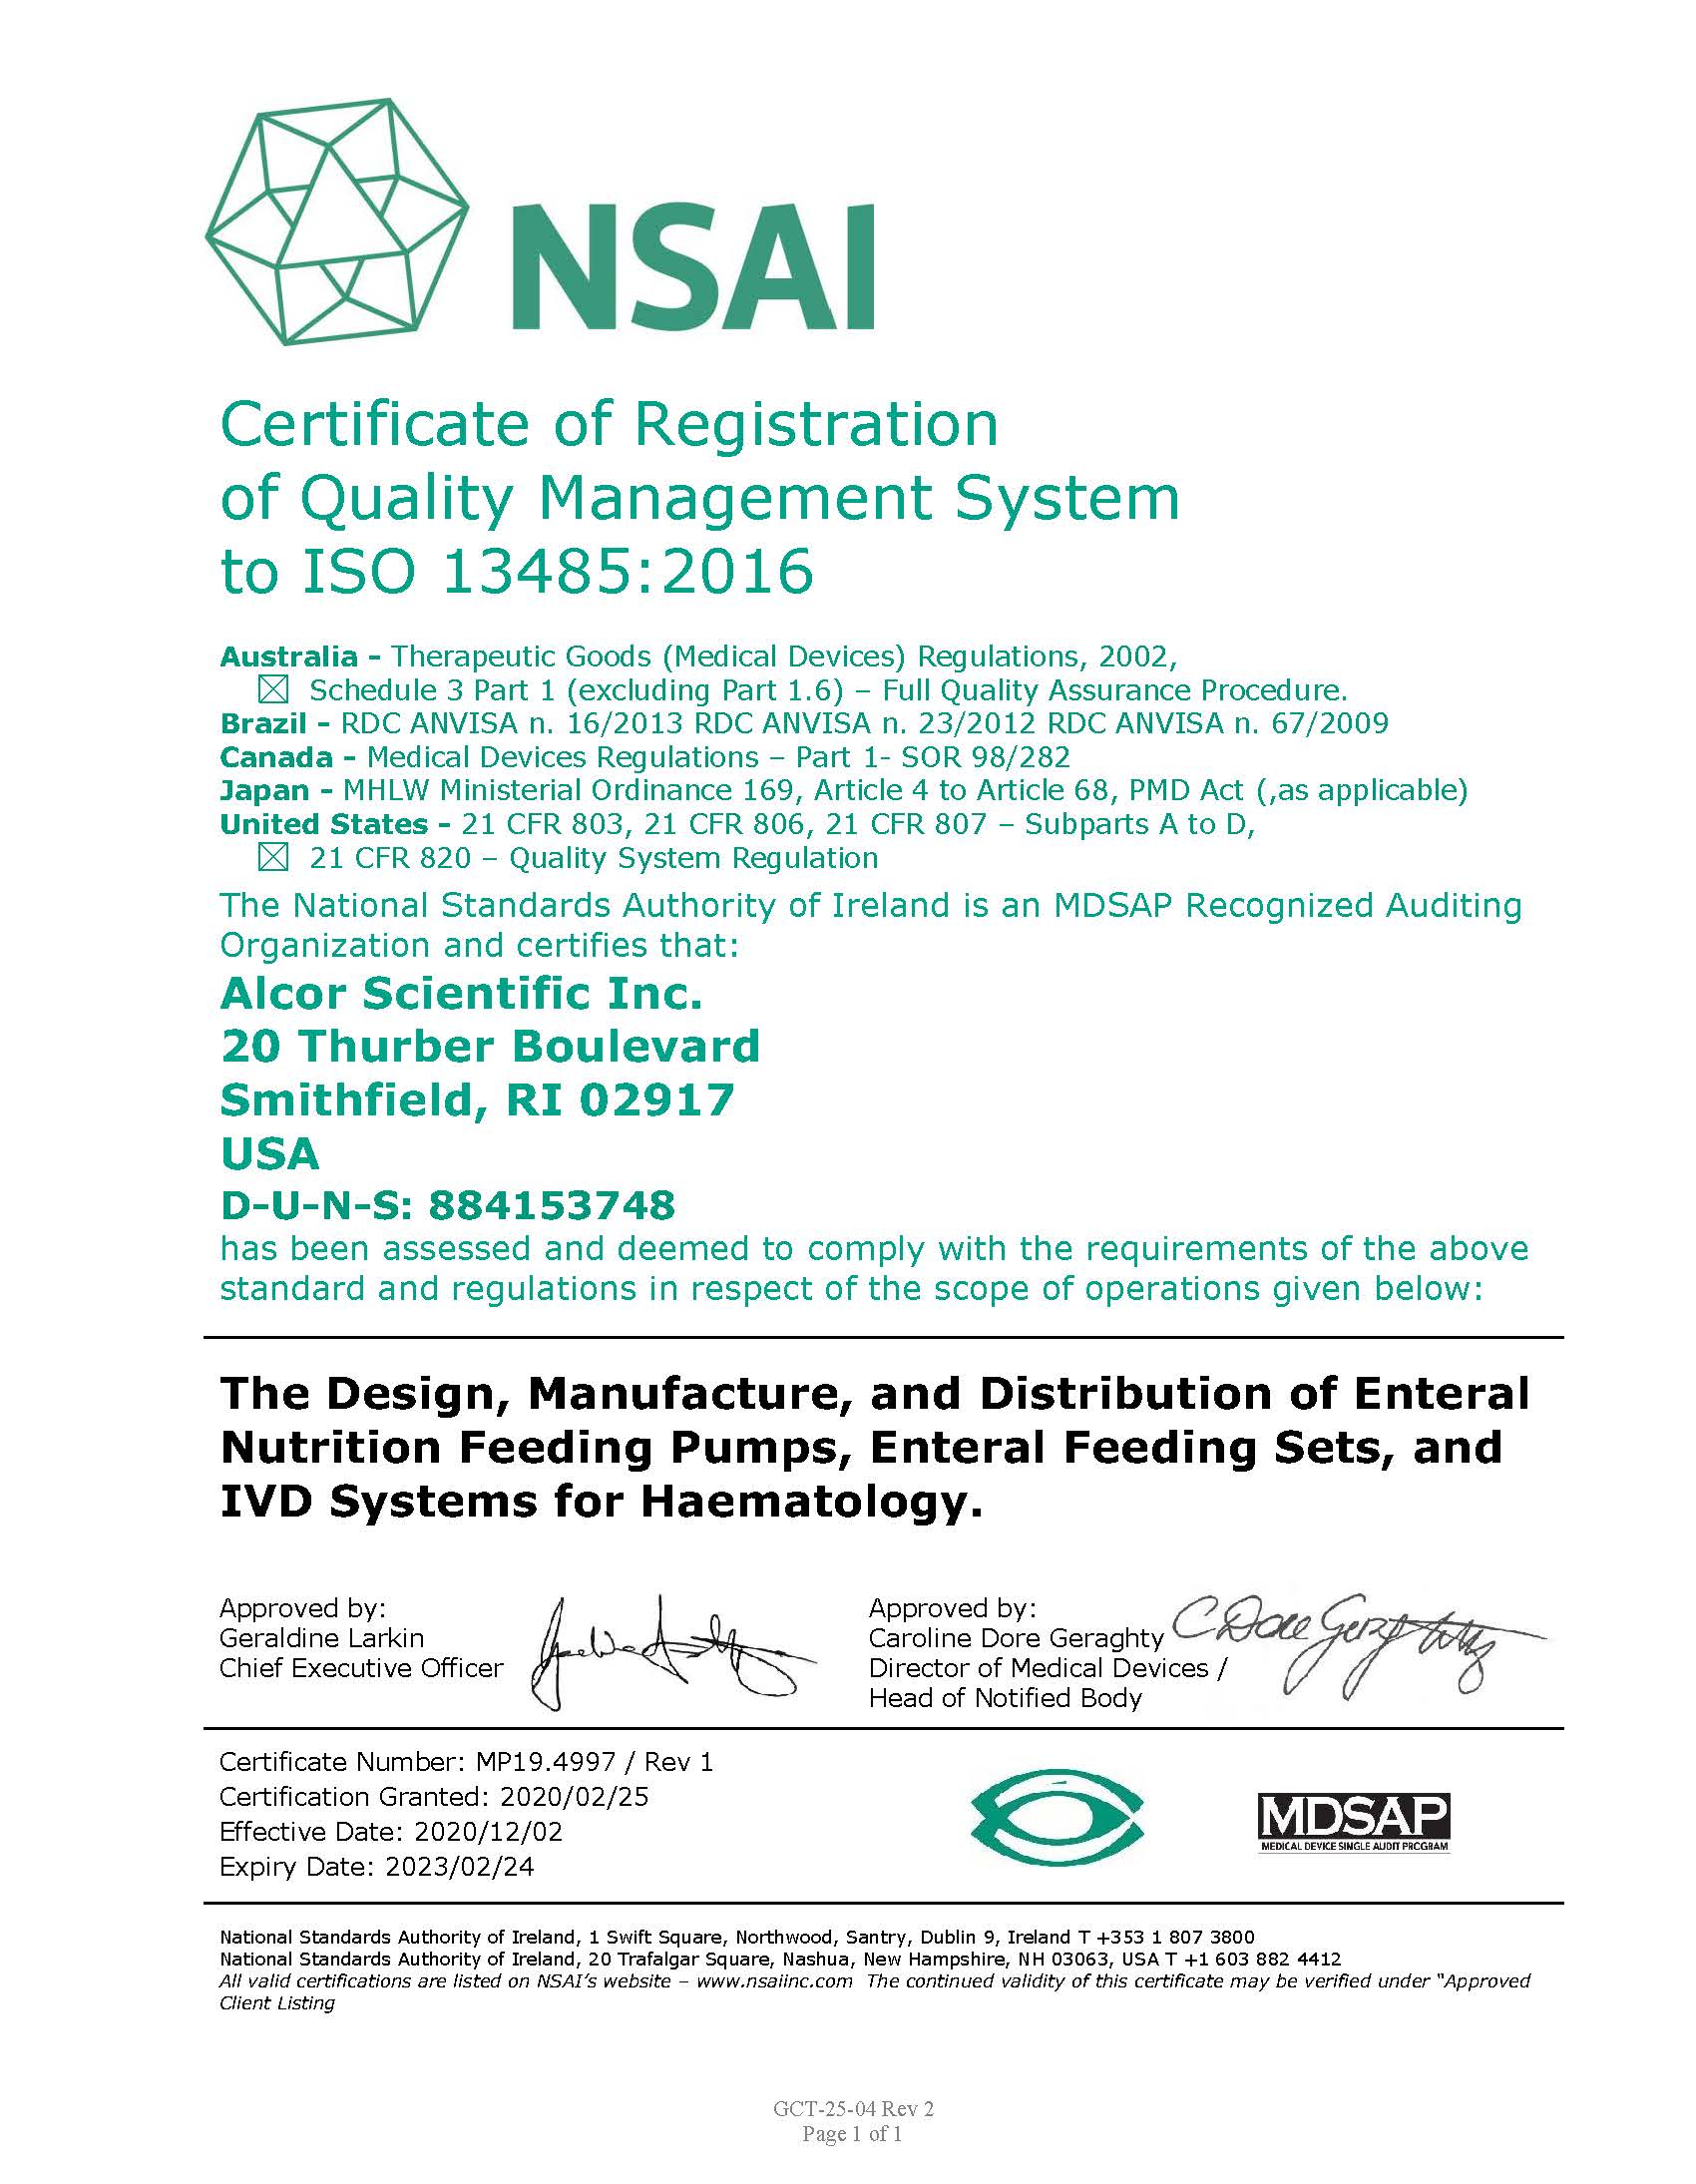 Copy of MP19.4997 Certificate of Registration of Quality Management System to ISO 13485:2016 MP19.4997